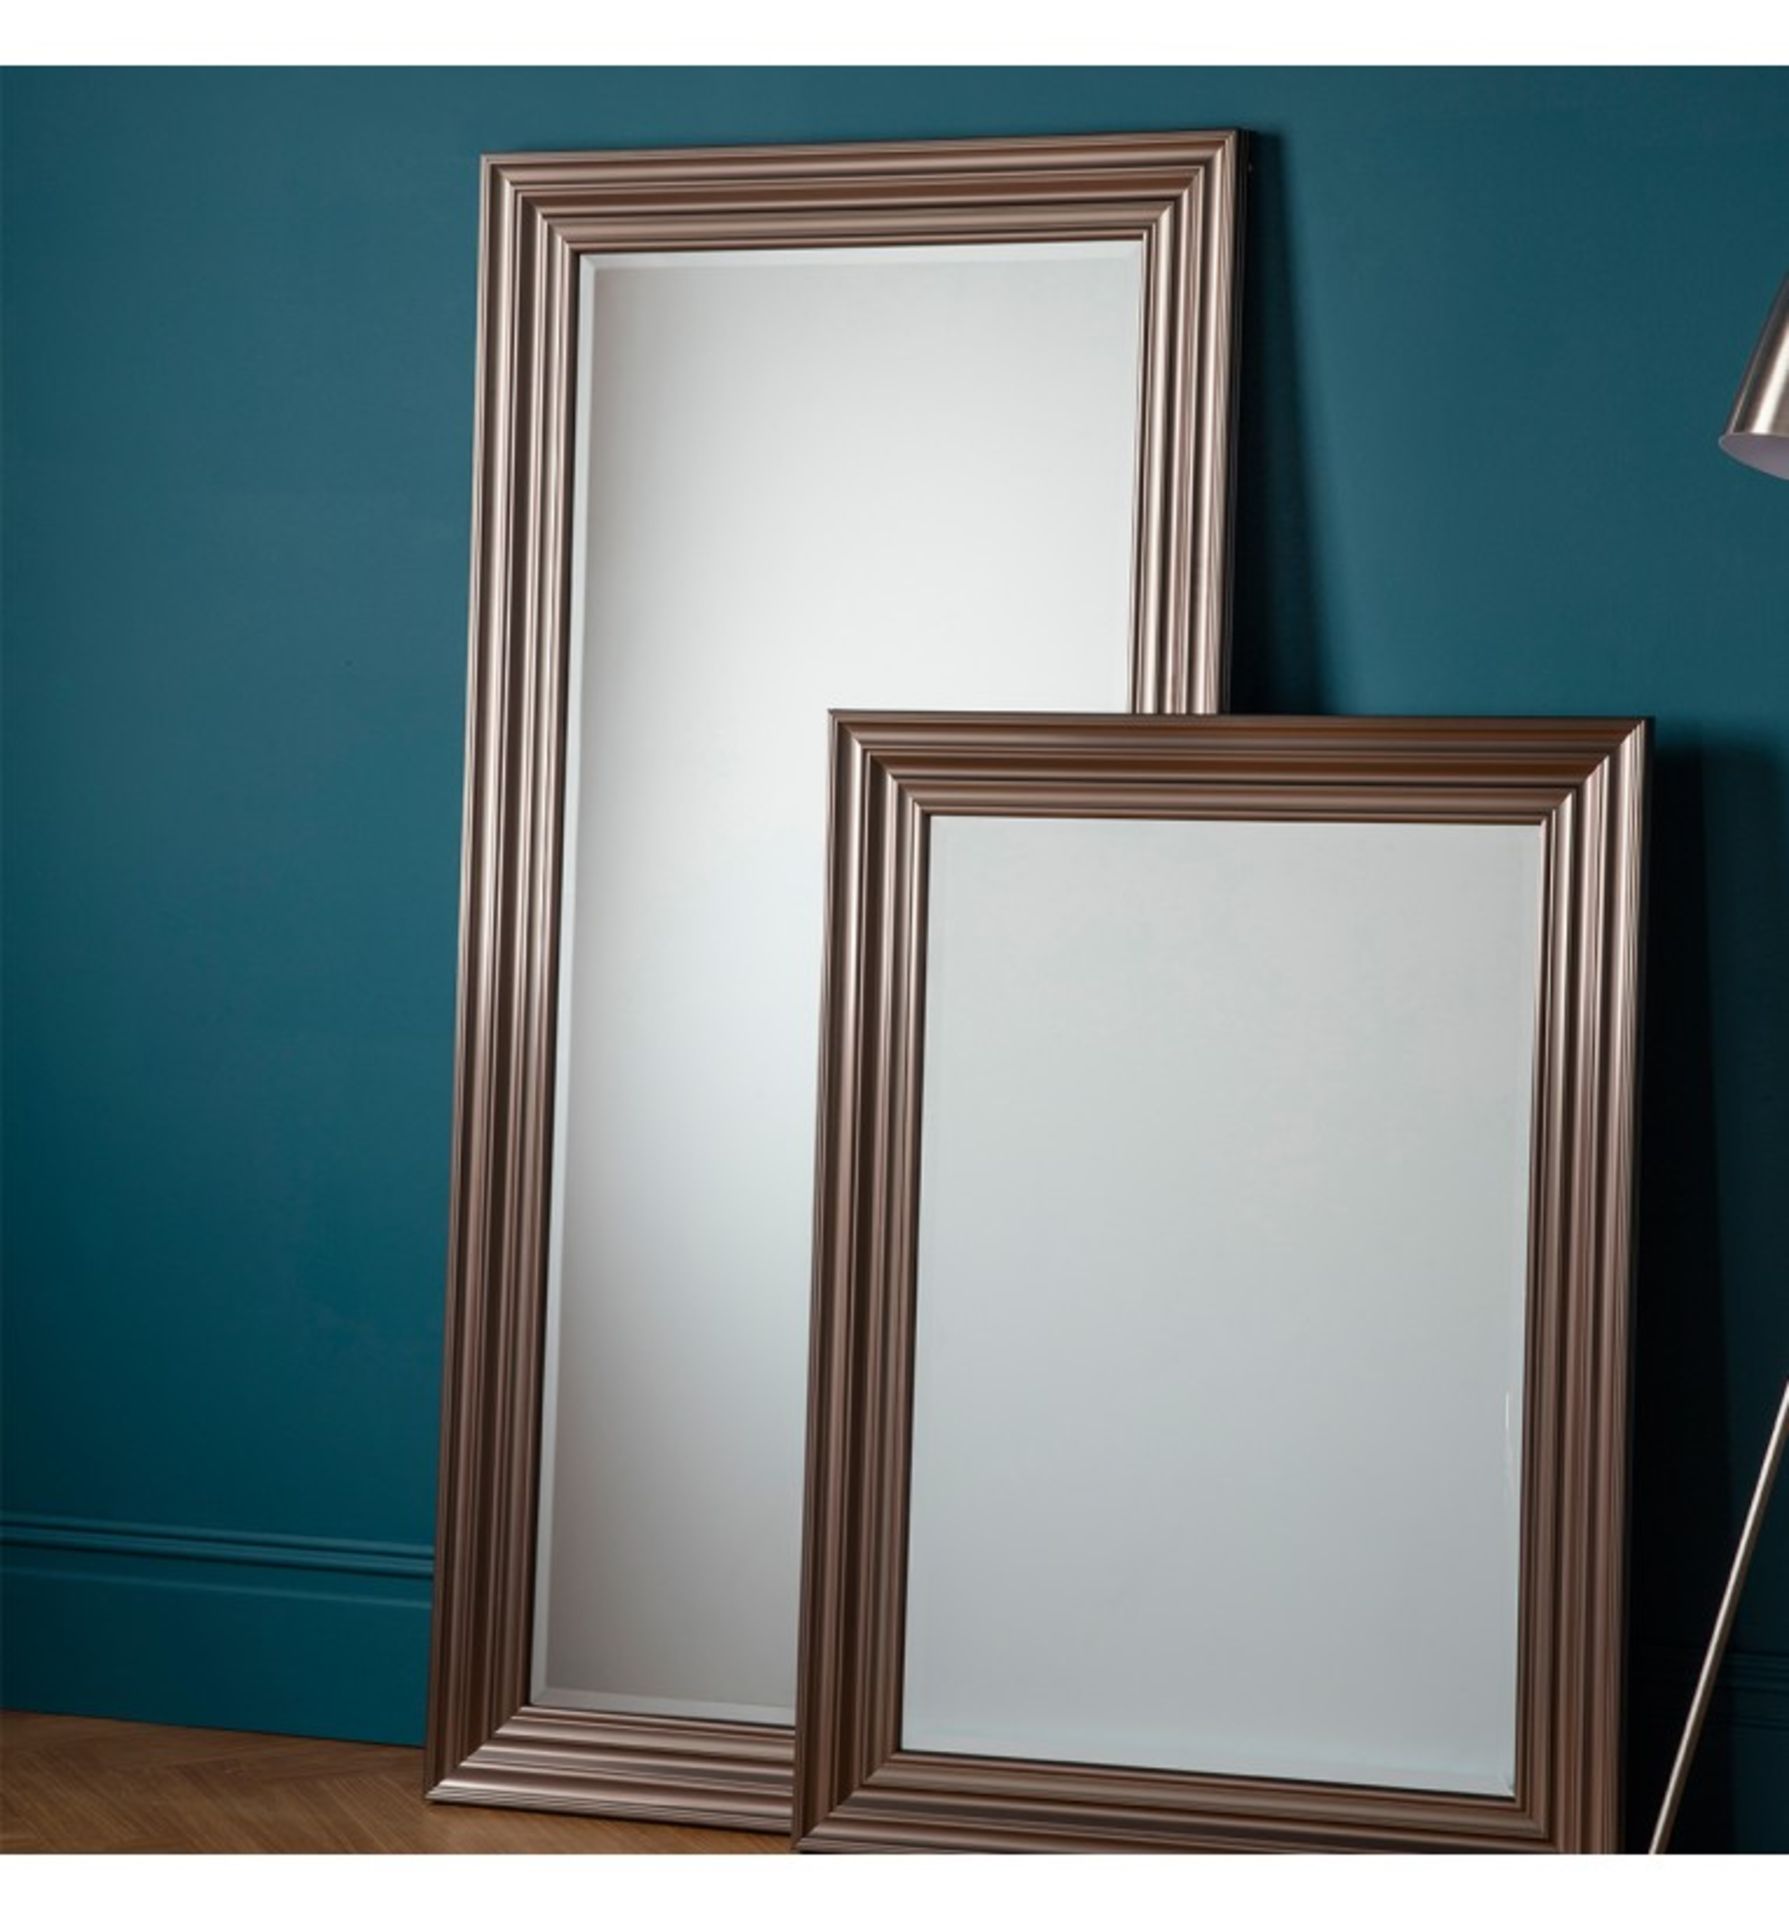 Erskine Leaner Pewter Mirror Update your living space with this on trend contempoary pewter mirror